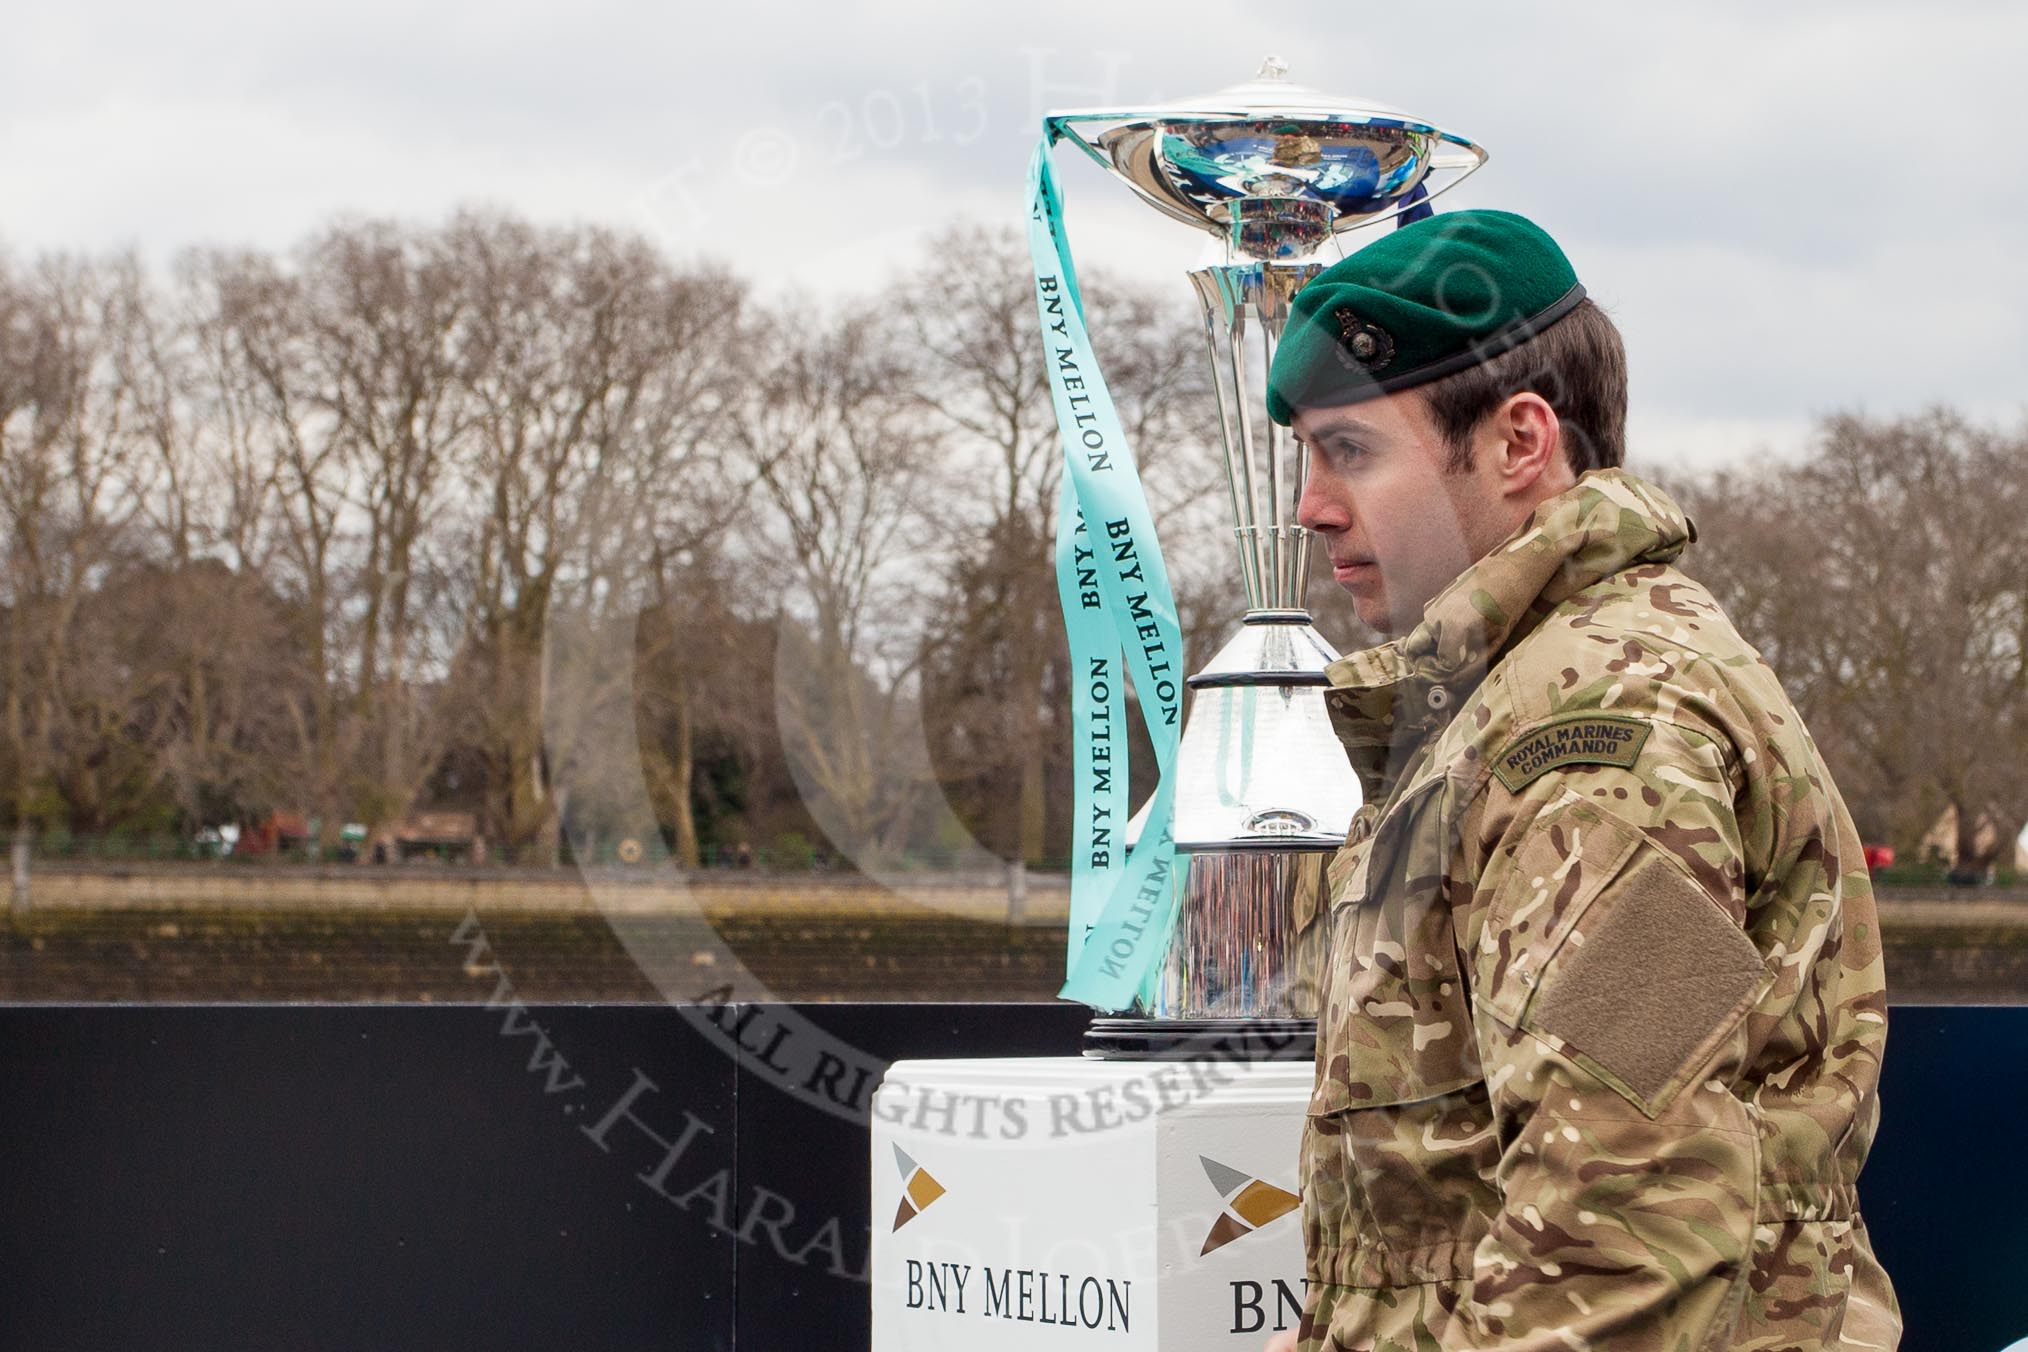 The Boat Race 2013: The 2013 Boat Race trophy is put on a stand, by a member of a Royal Marines commando, for the following toss of the coin between the Oxford and Cambridge teams..
Putney,
London SW15,

United Kingdom,
on 31 March 2013 at 14:14, image #70